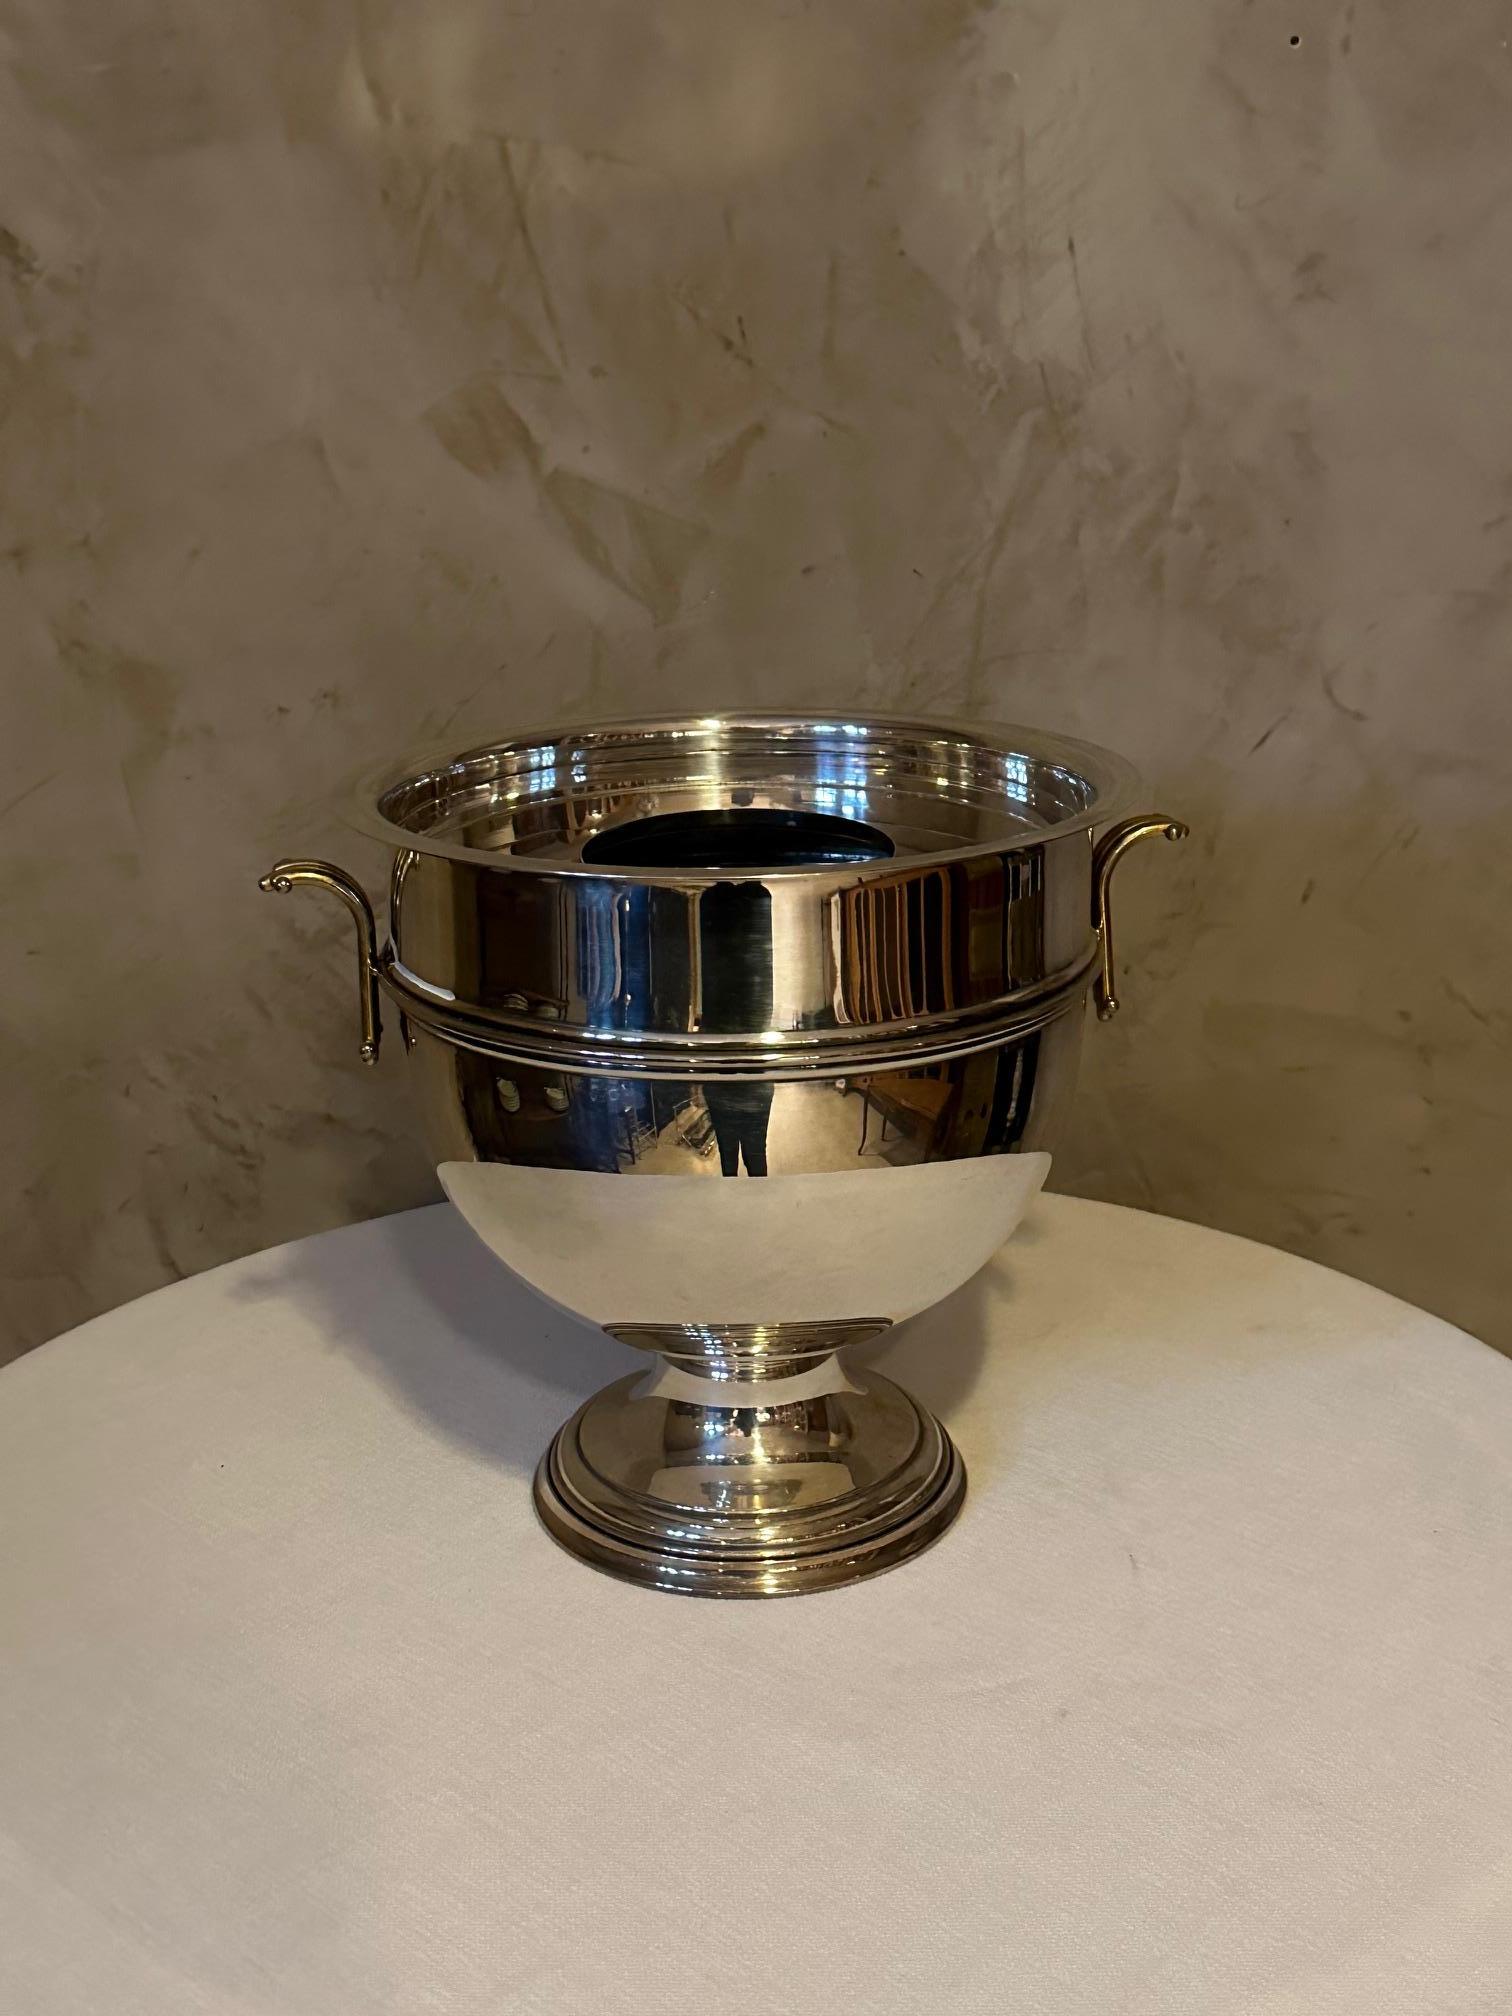 Very beautiful silver-plated champagne bucket from the 1930s in good condition.
Gold metal handles very typical of the art deco period.
“Guillermain” stamp on the underside, marked registered French.